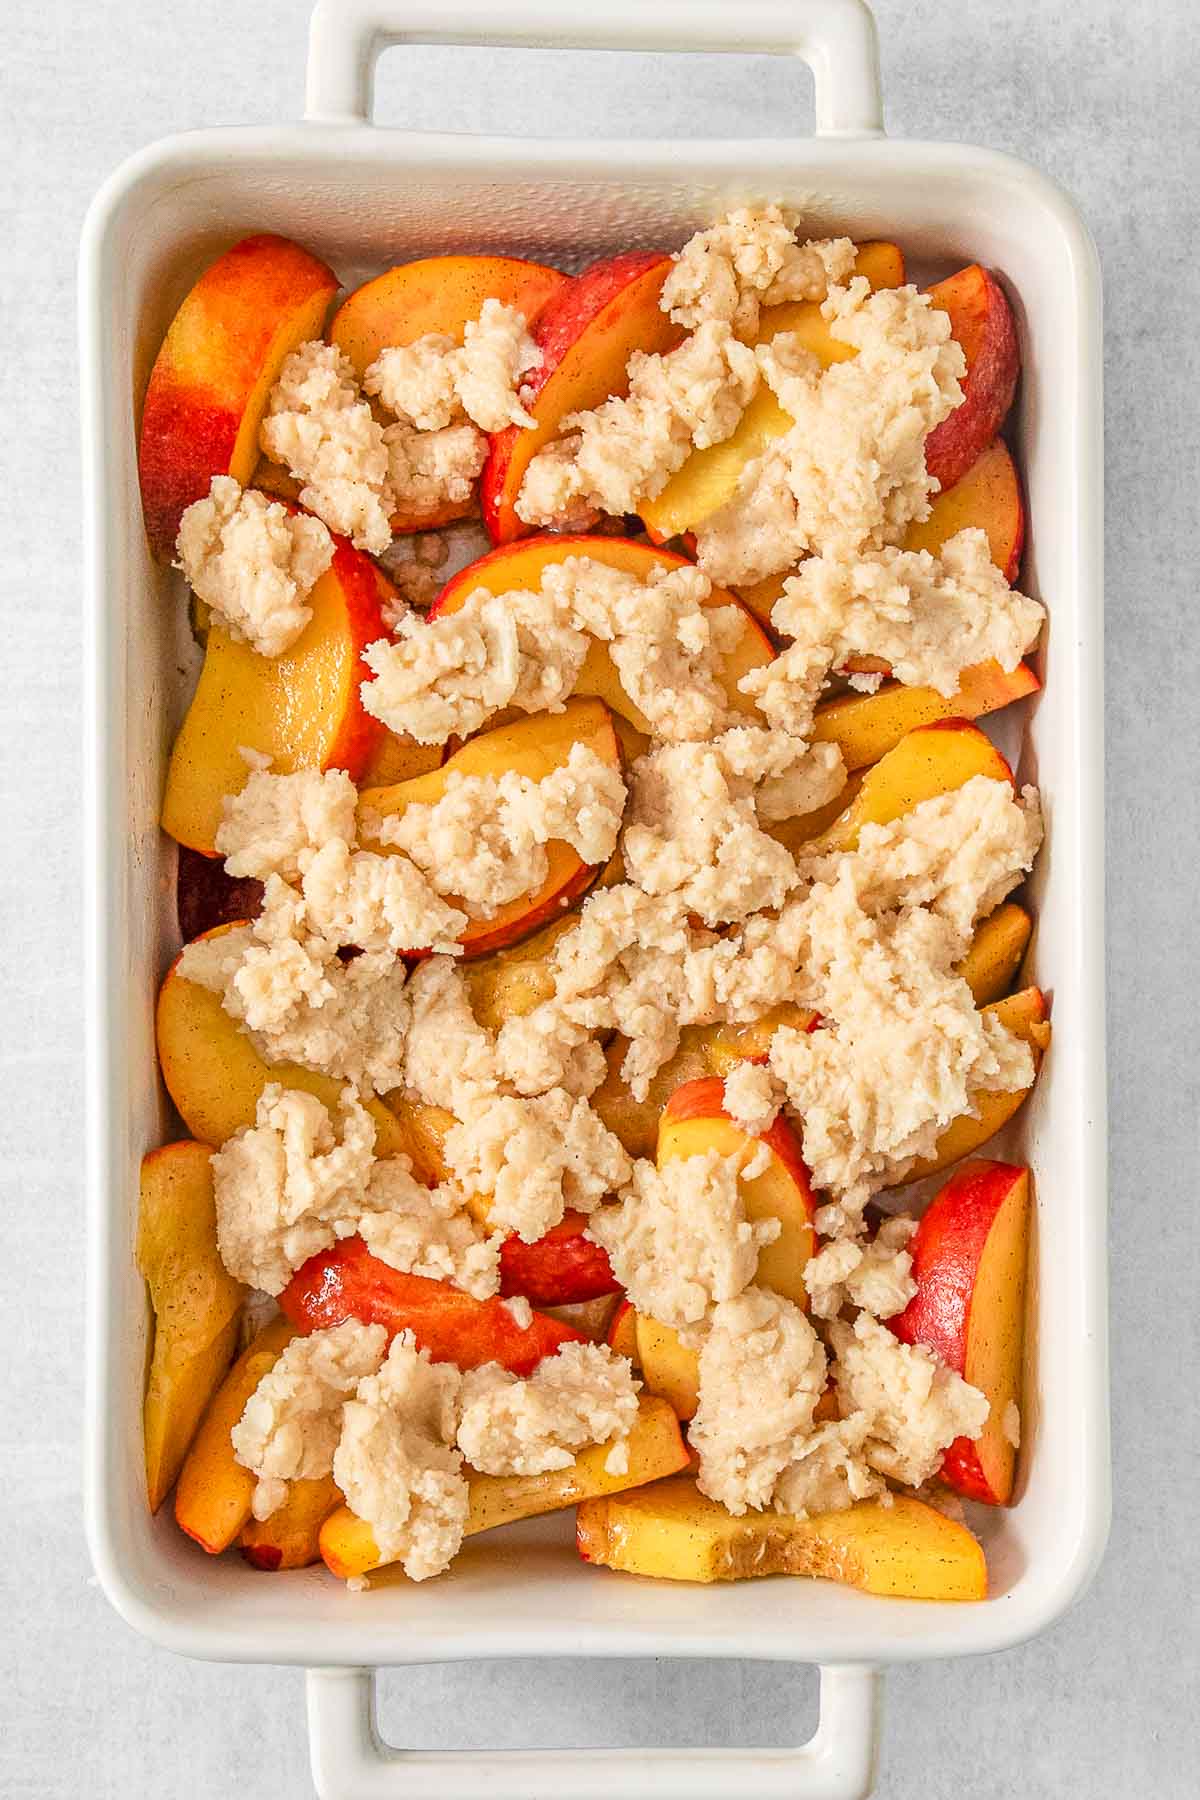 Baking dish full of sliced peaches and cobbler topping sprinkled overtop.